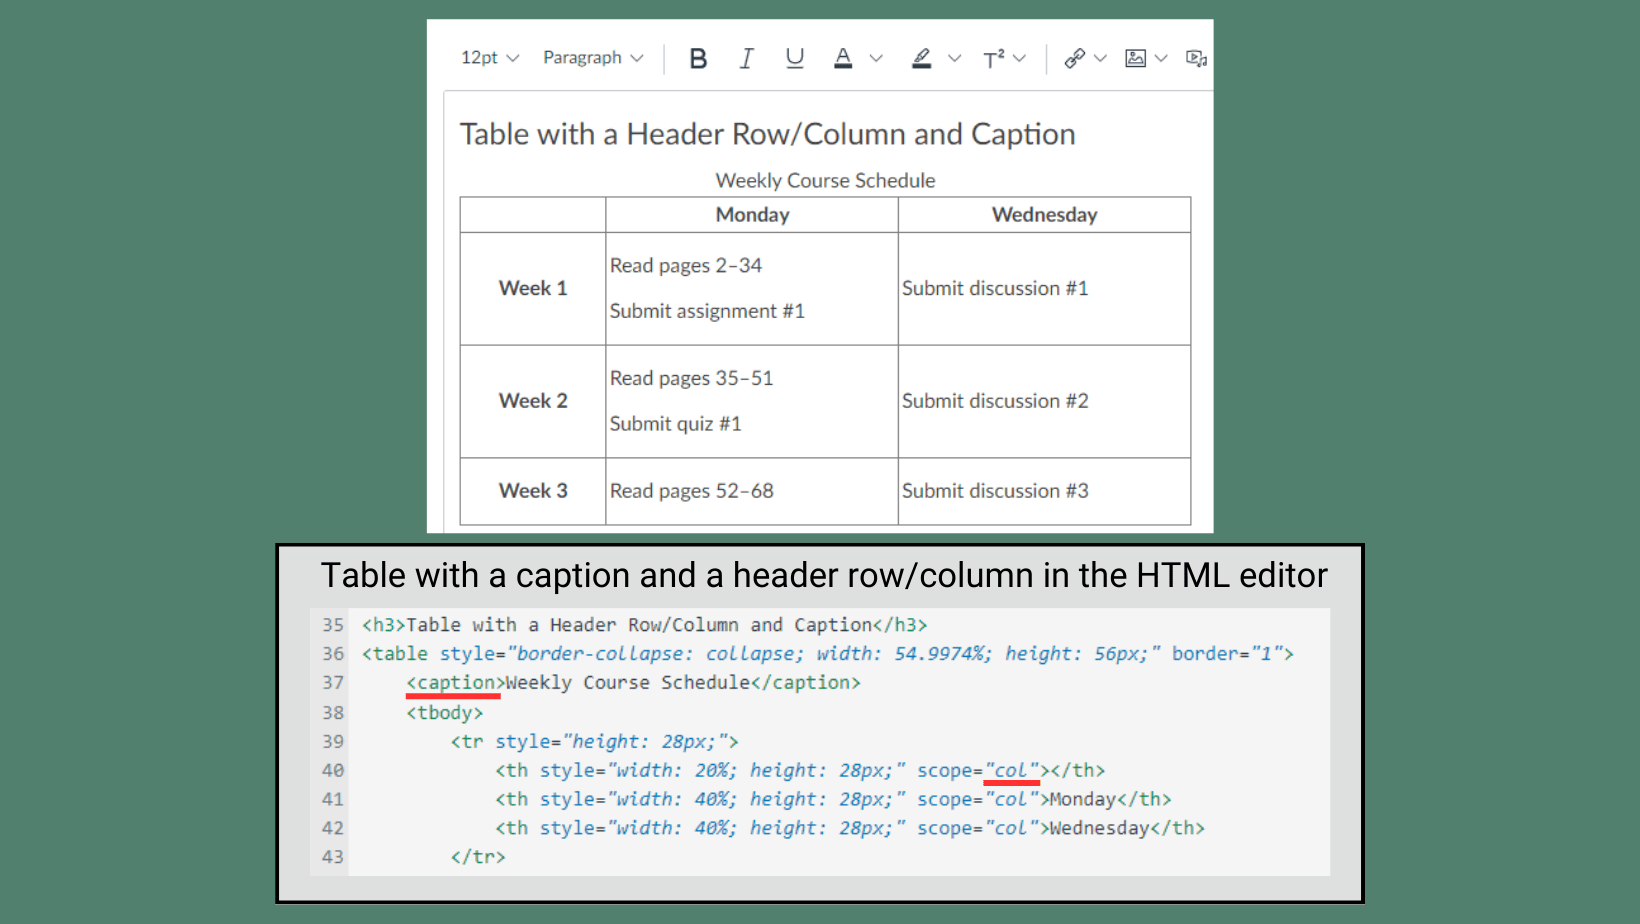 A screenshot depicting a properly formatted table in the Canvas RCE. The table is captioned ‘Weekly Course Schedule,’ with the header row displaying the weekdays Monday and Wednesday, while the header column includes weeks 1-3. A text box below the image displays the HTML editor view of the Canvas RCE. The words 'caption' and 'col' are underlined in the editor, indicating how a table with a caption and header columns are coded.